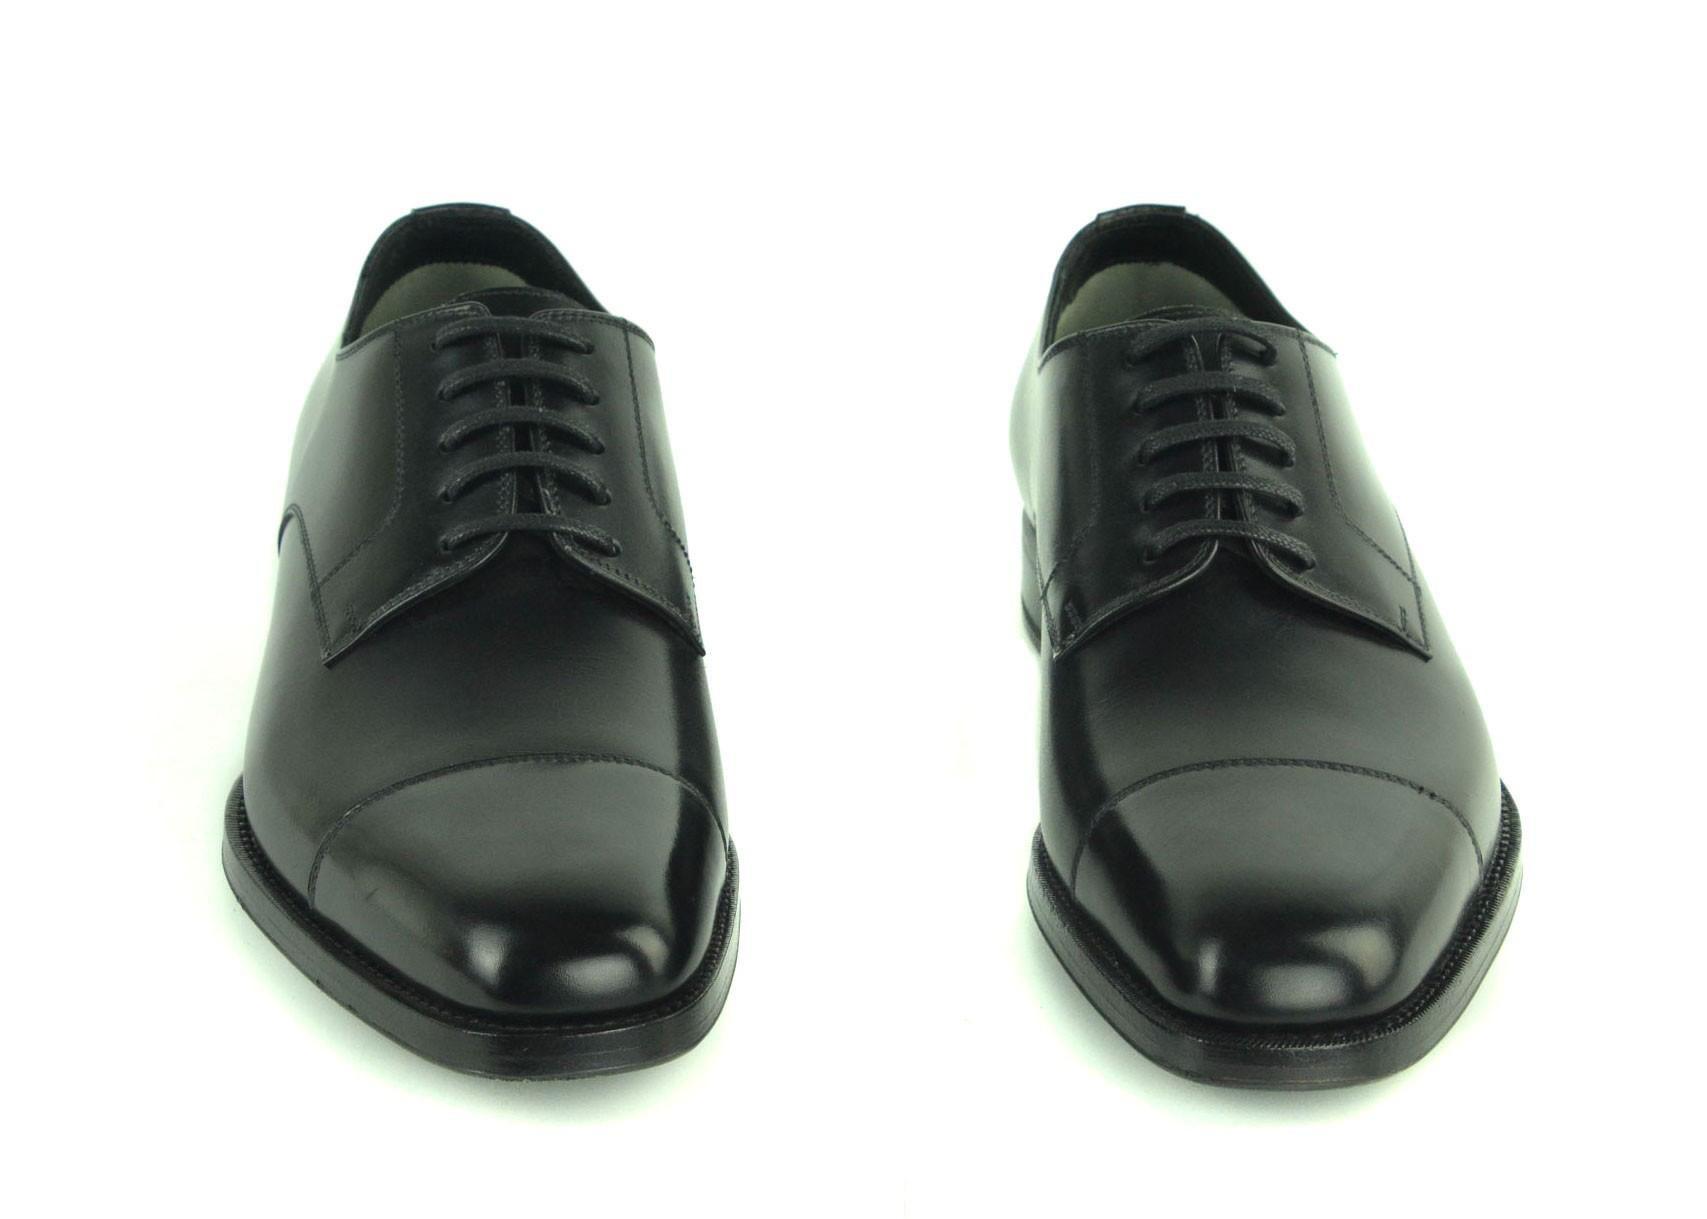 Tom Ford - Sleek and timeless. The number one name in luxury menswear. These Tom Ford Derby Shoes are presented in smooth leather for an undeniably sophisticated look. Handcrafted in Italy from burnished leather. Fastened with classic laces, they